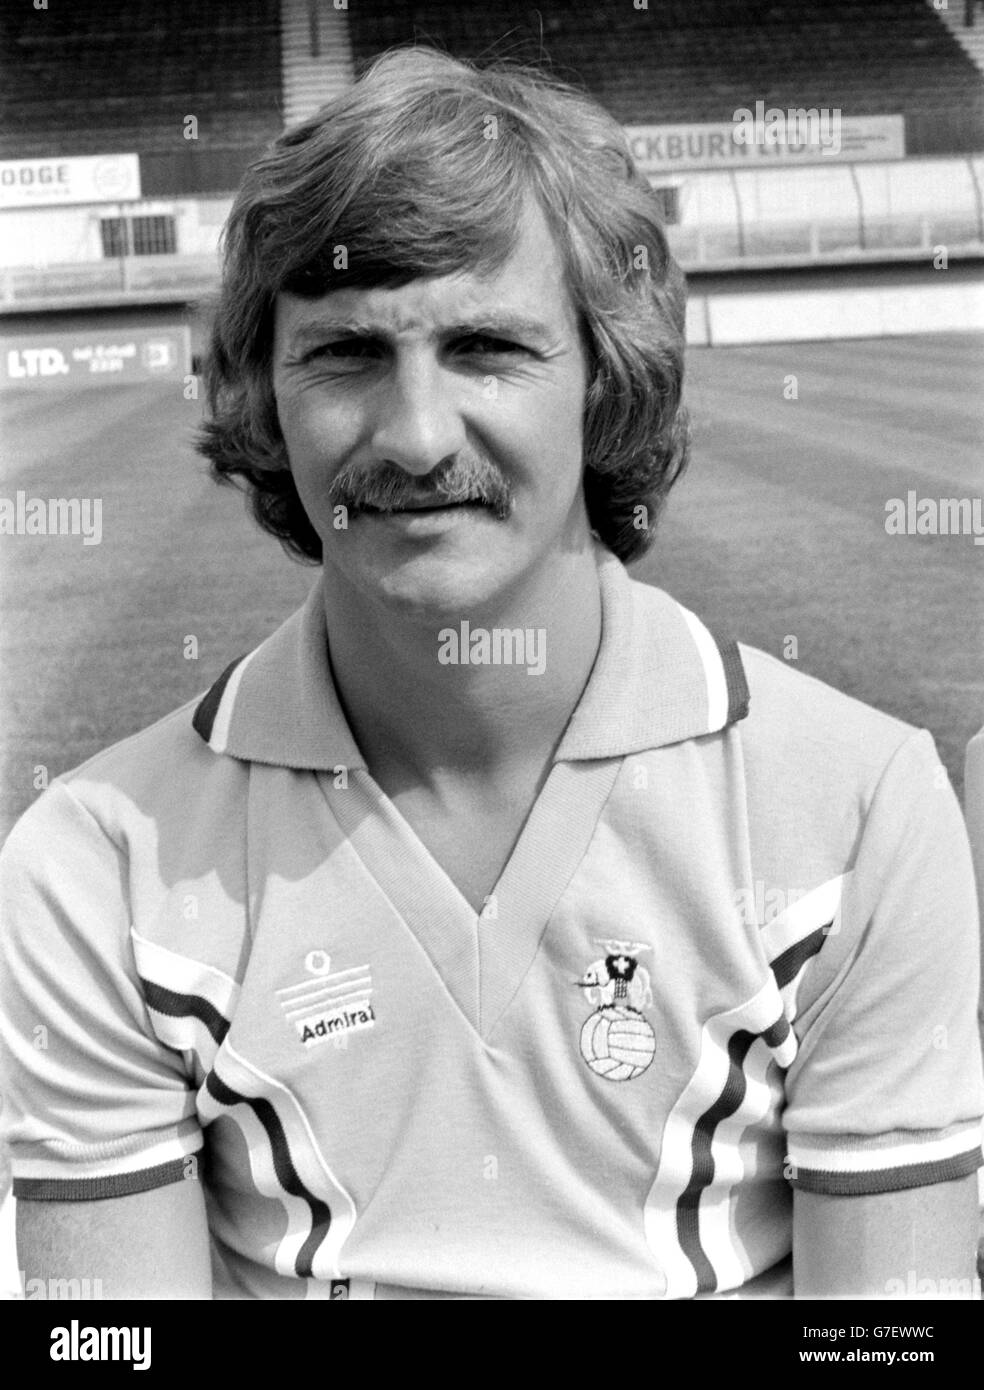 Barry Powell Coventry City. Barry Powell of Coventry City Football Club ahead of the 1979/80 season. Stock Photo